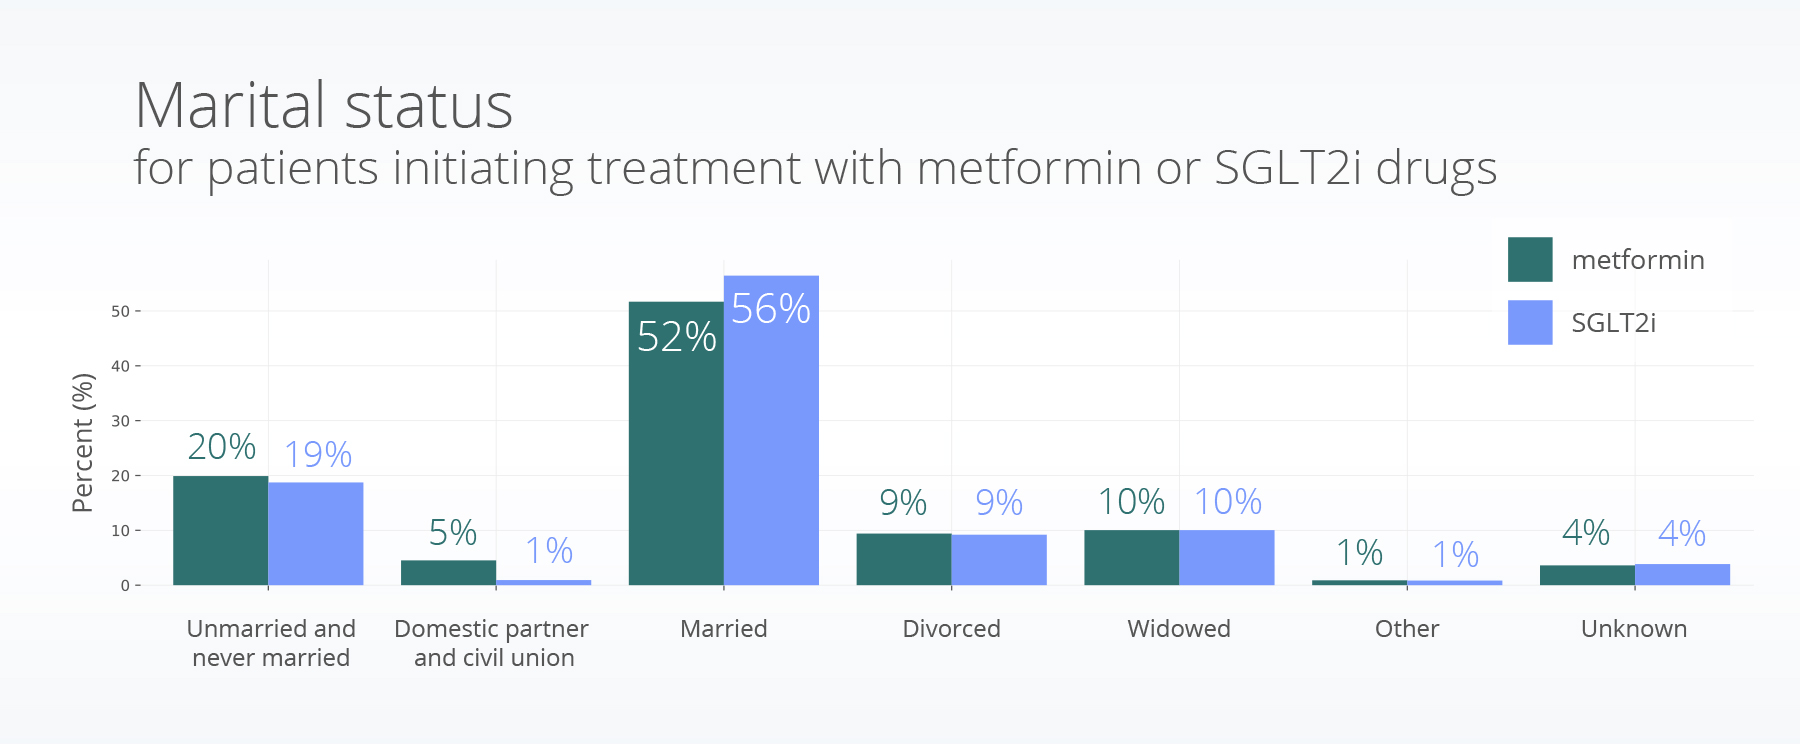 Marital status for patients initiating treatment with metformin or SGLT2i drugs